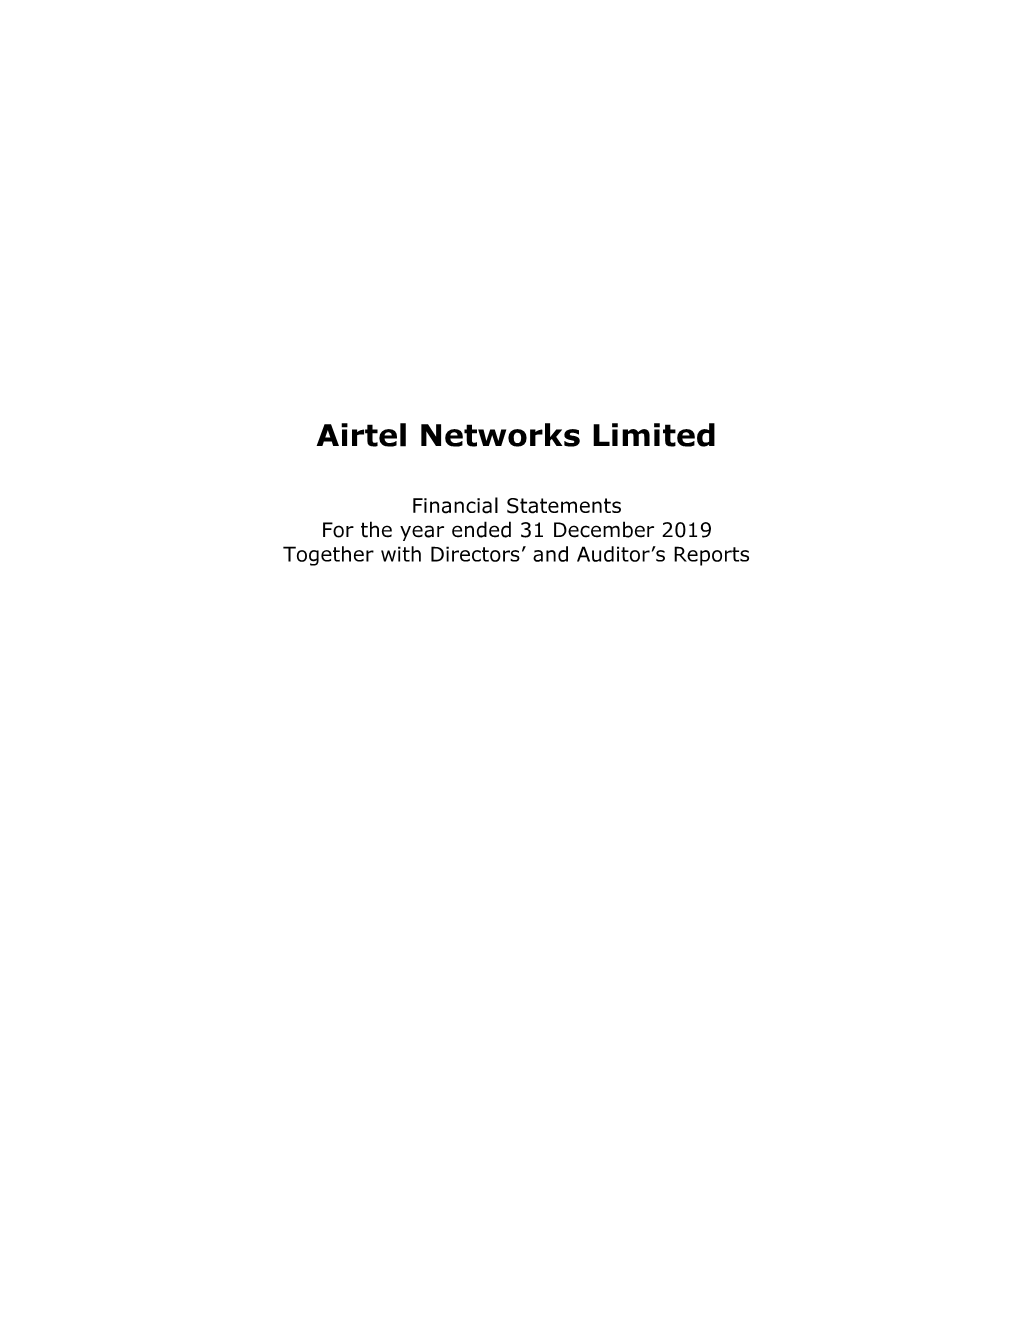 Airtel Networks Limited Annual Report and Financial Statements – 31 December 2019